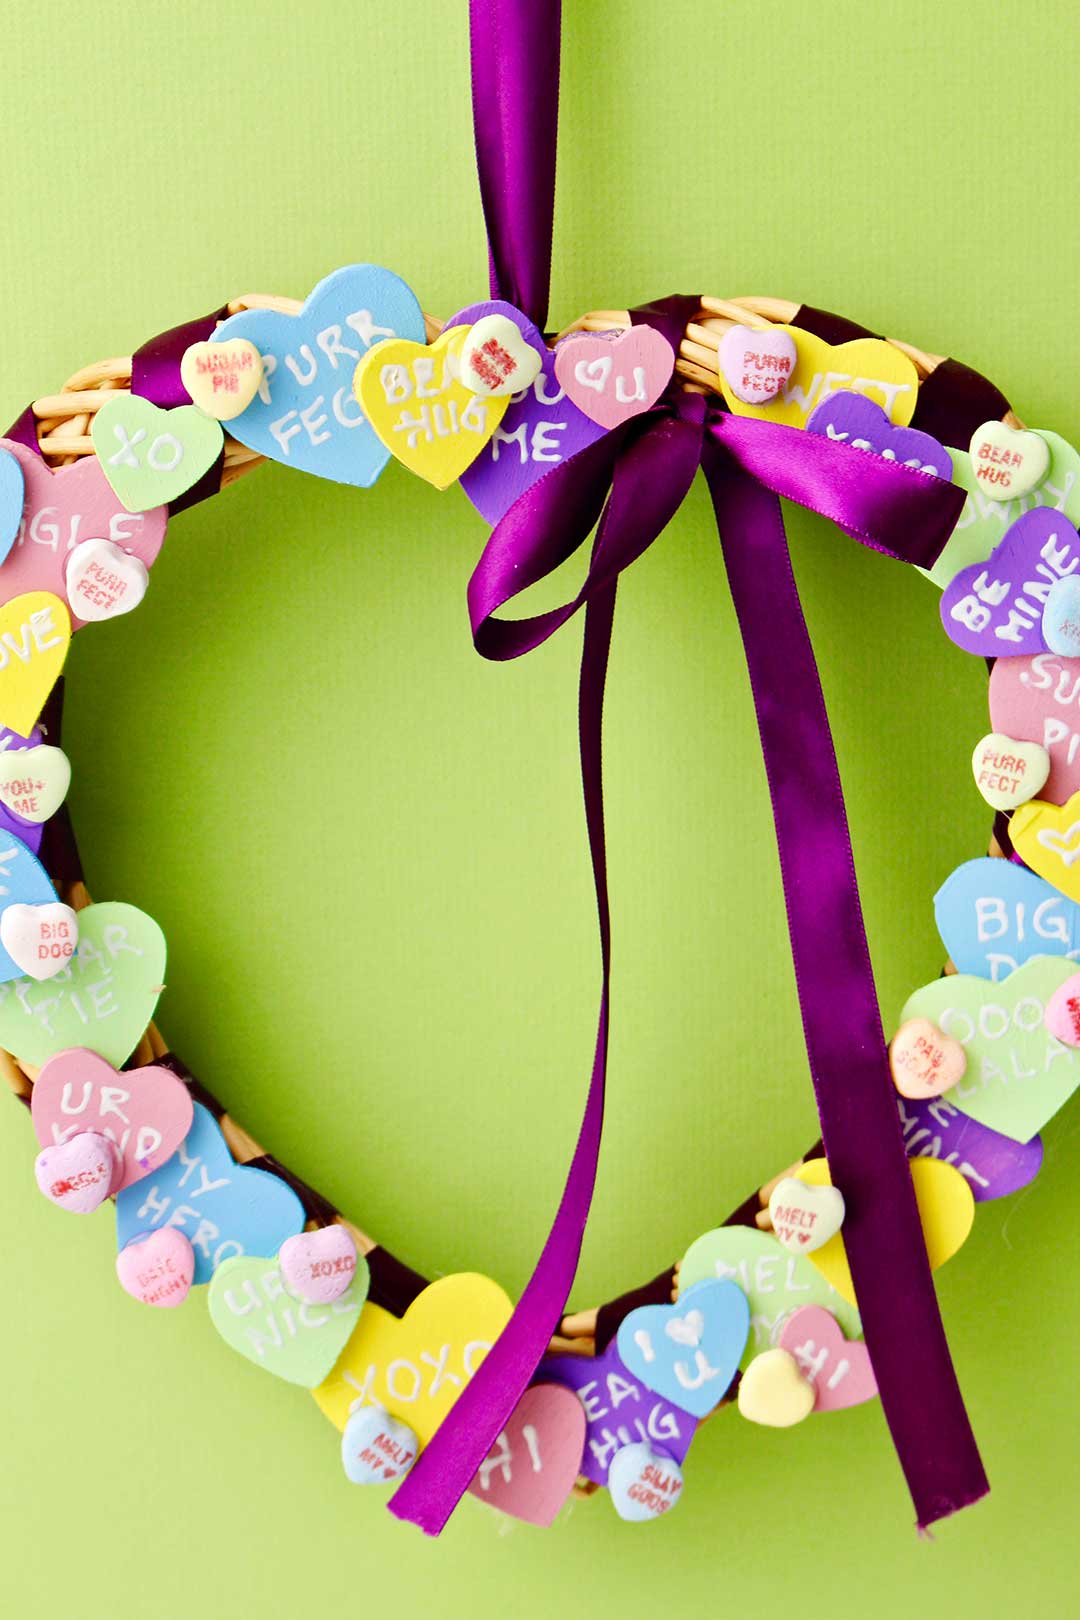 Completed Conversation Heart Wreath hung against a celery green backdrop.